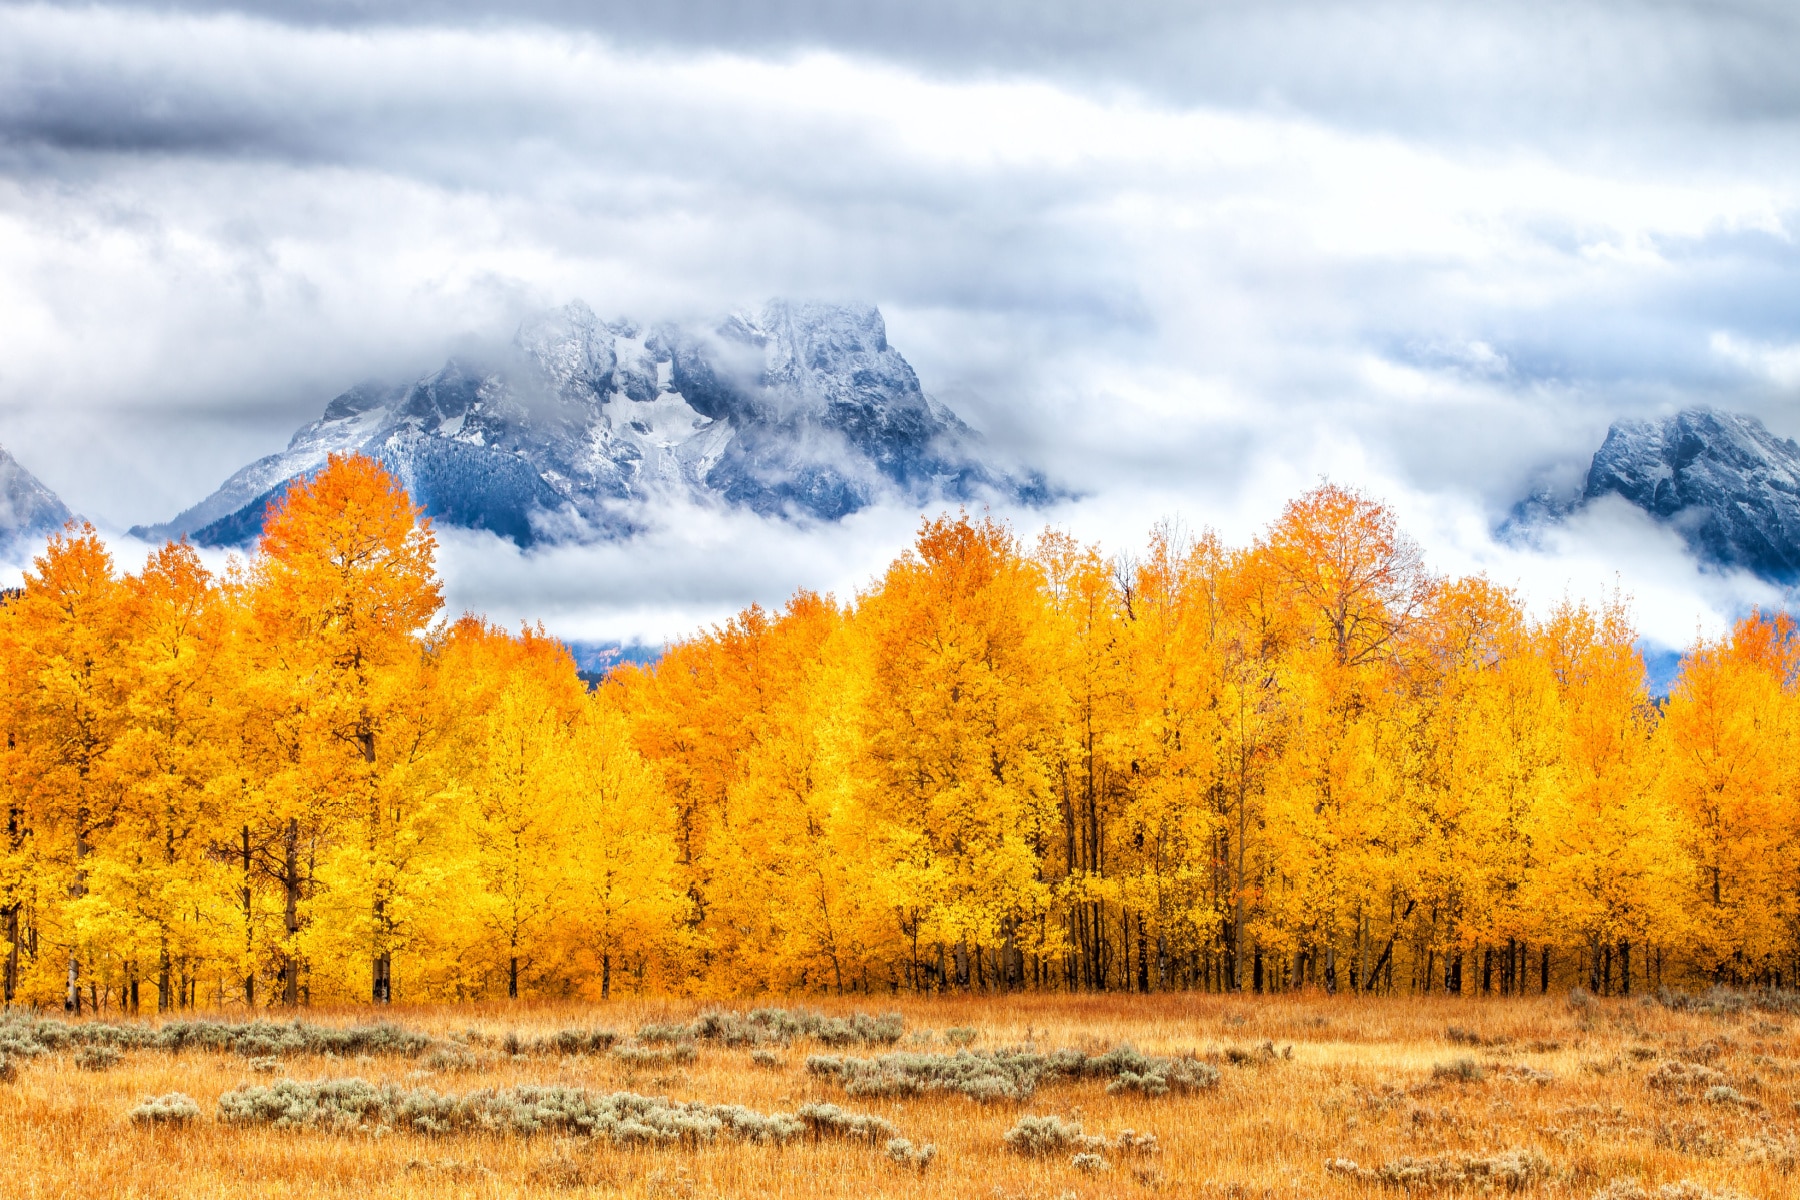 Fall foliage with wintry mountains in the background is a hallmark of Yellowstone in the fall.